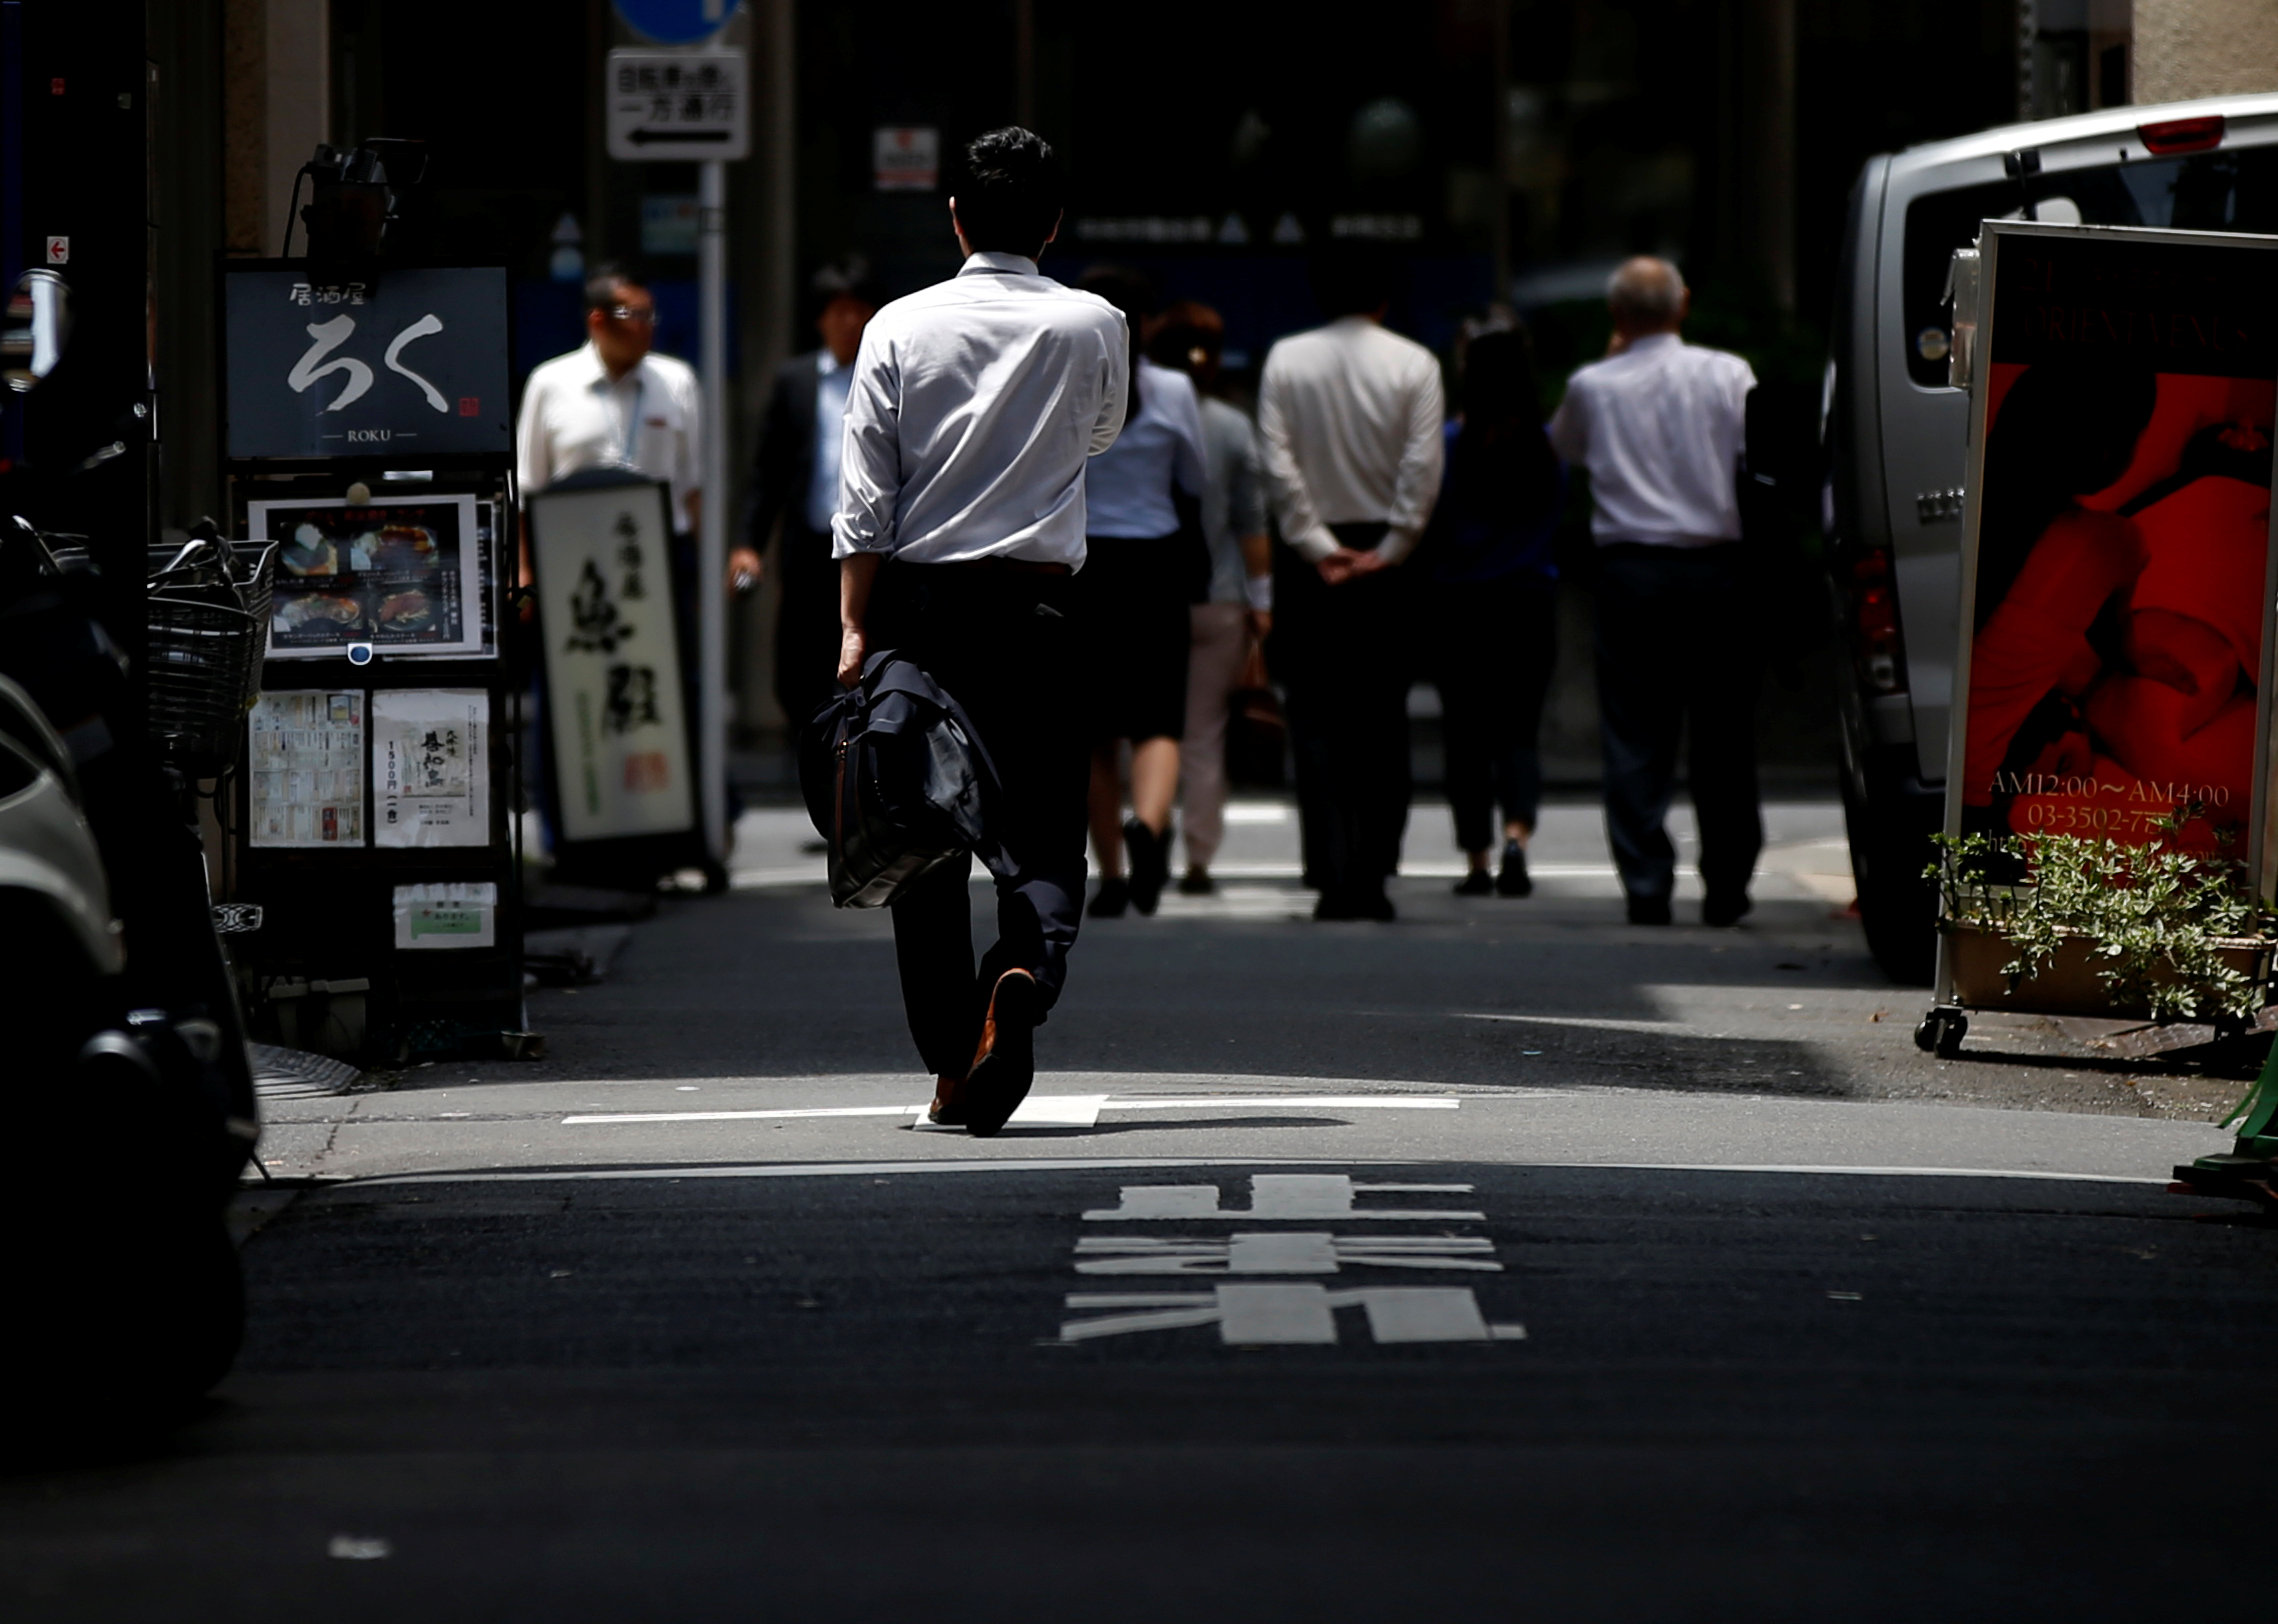 Pedestrians walk through a Tokyo business district on Tuesday. Japan's job availability rose to the highest level in over 24 years. | REUTERS